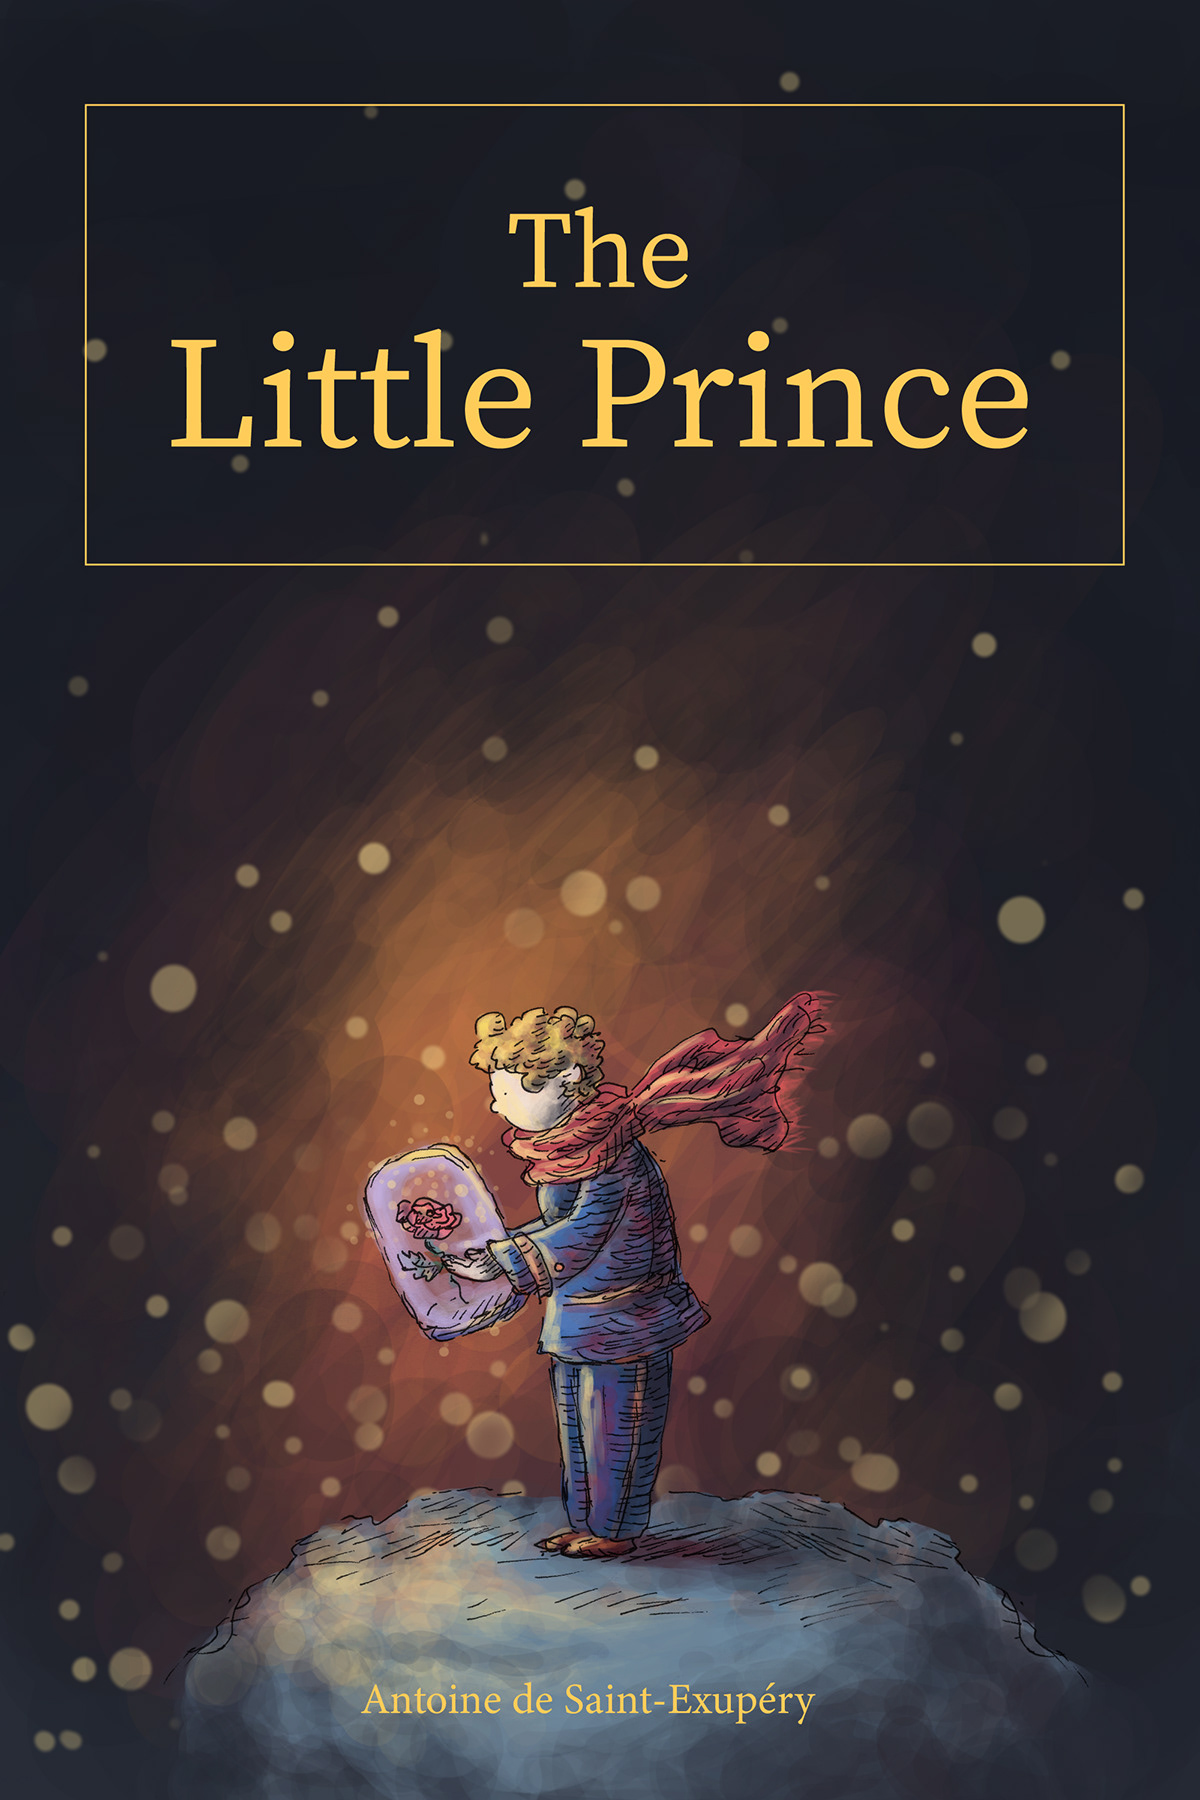 thesis of the little prince